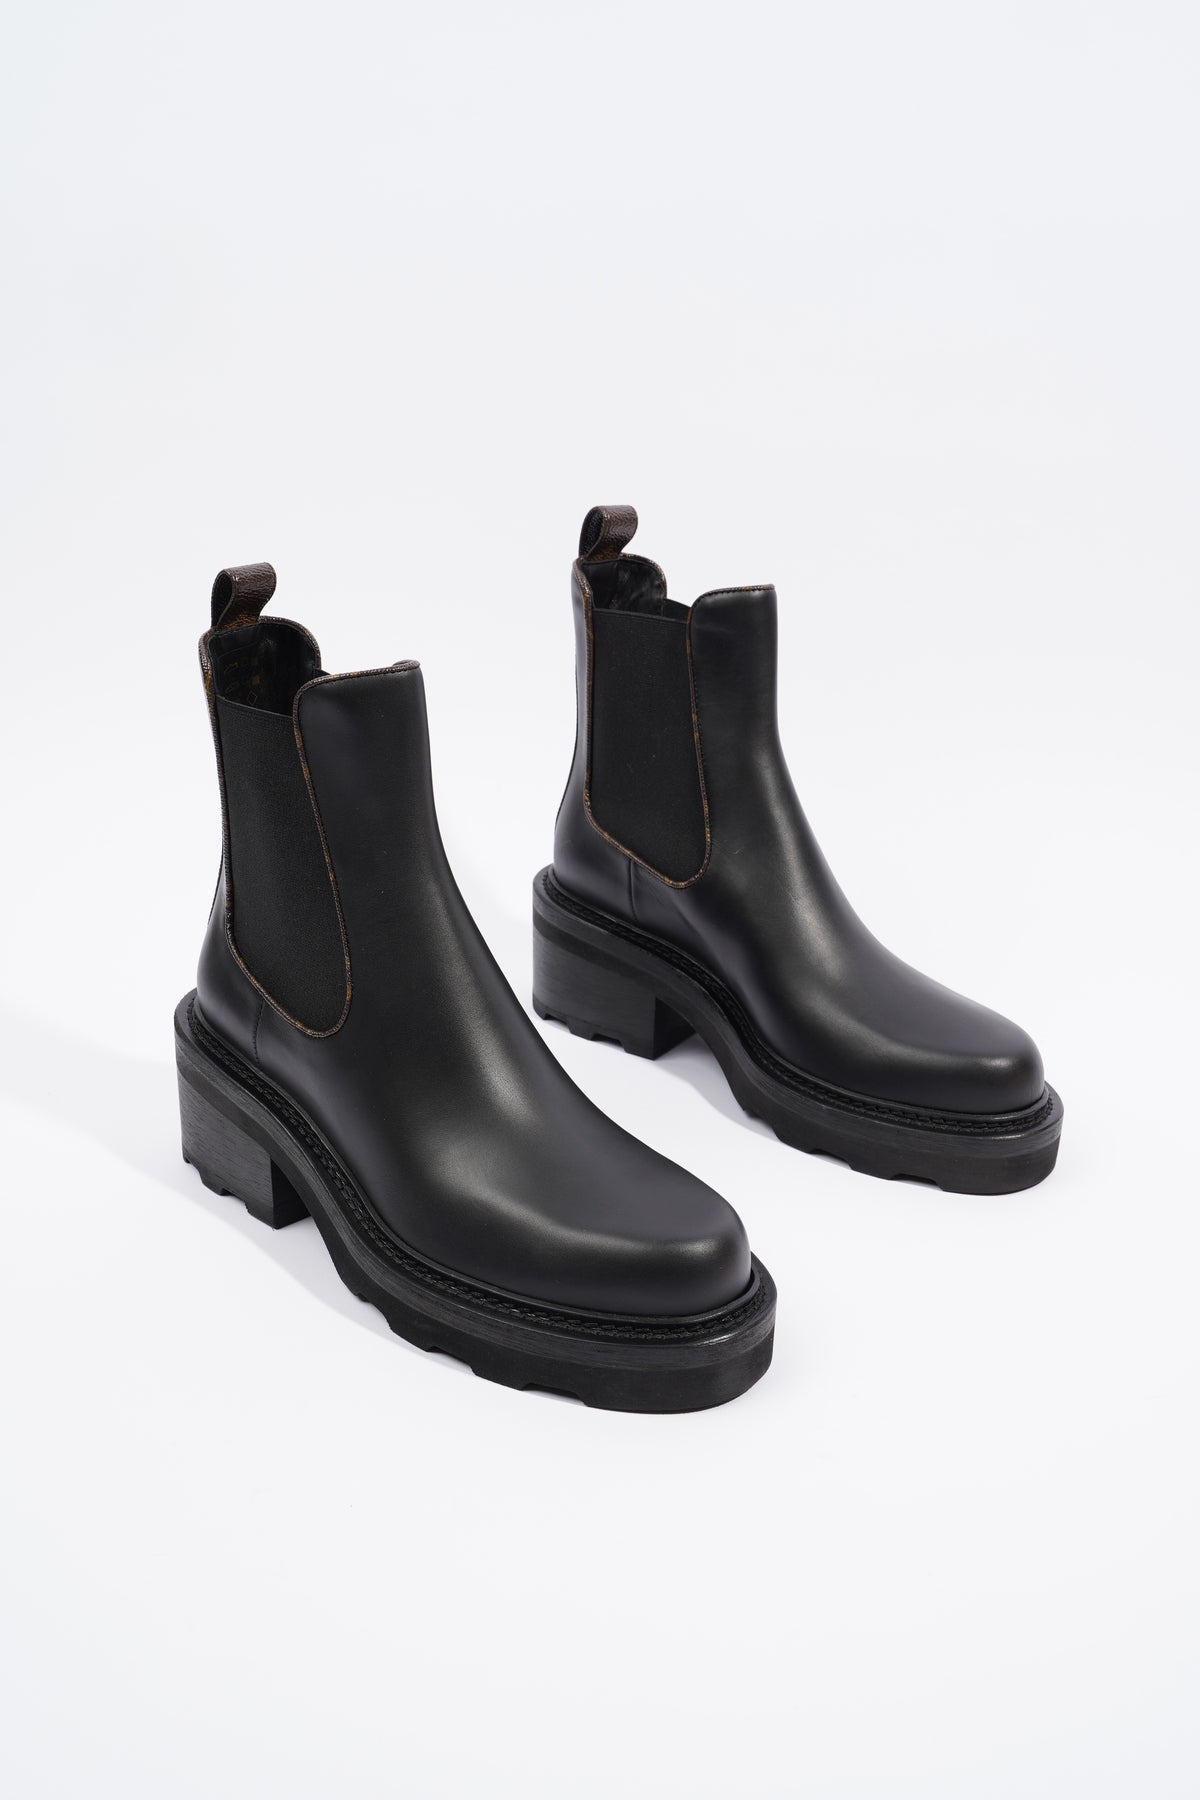 LV Beaubourg Ankle Boots - Luxury Black